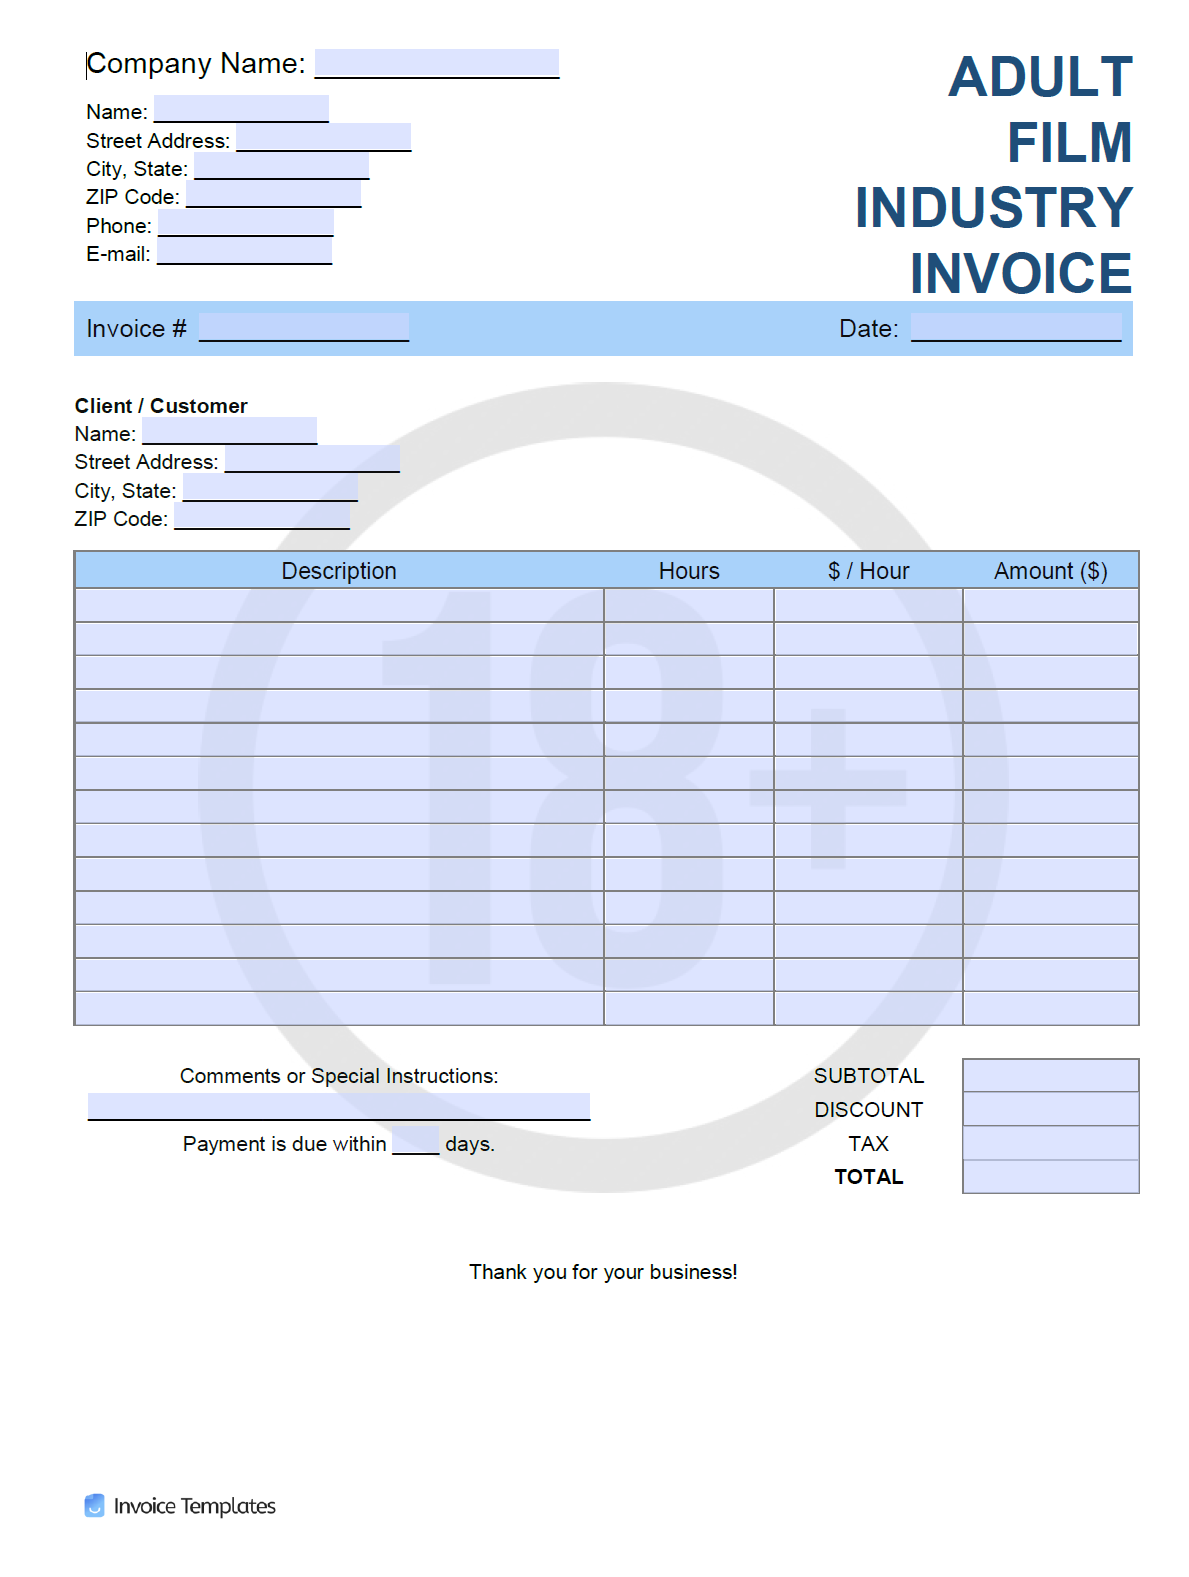 Free Adult Film Industry Invoice Template  PDF  WORD  EXCEL Pertaining To Film Invoice Template